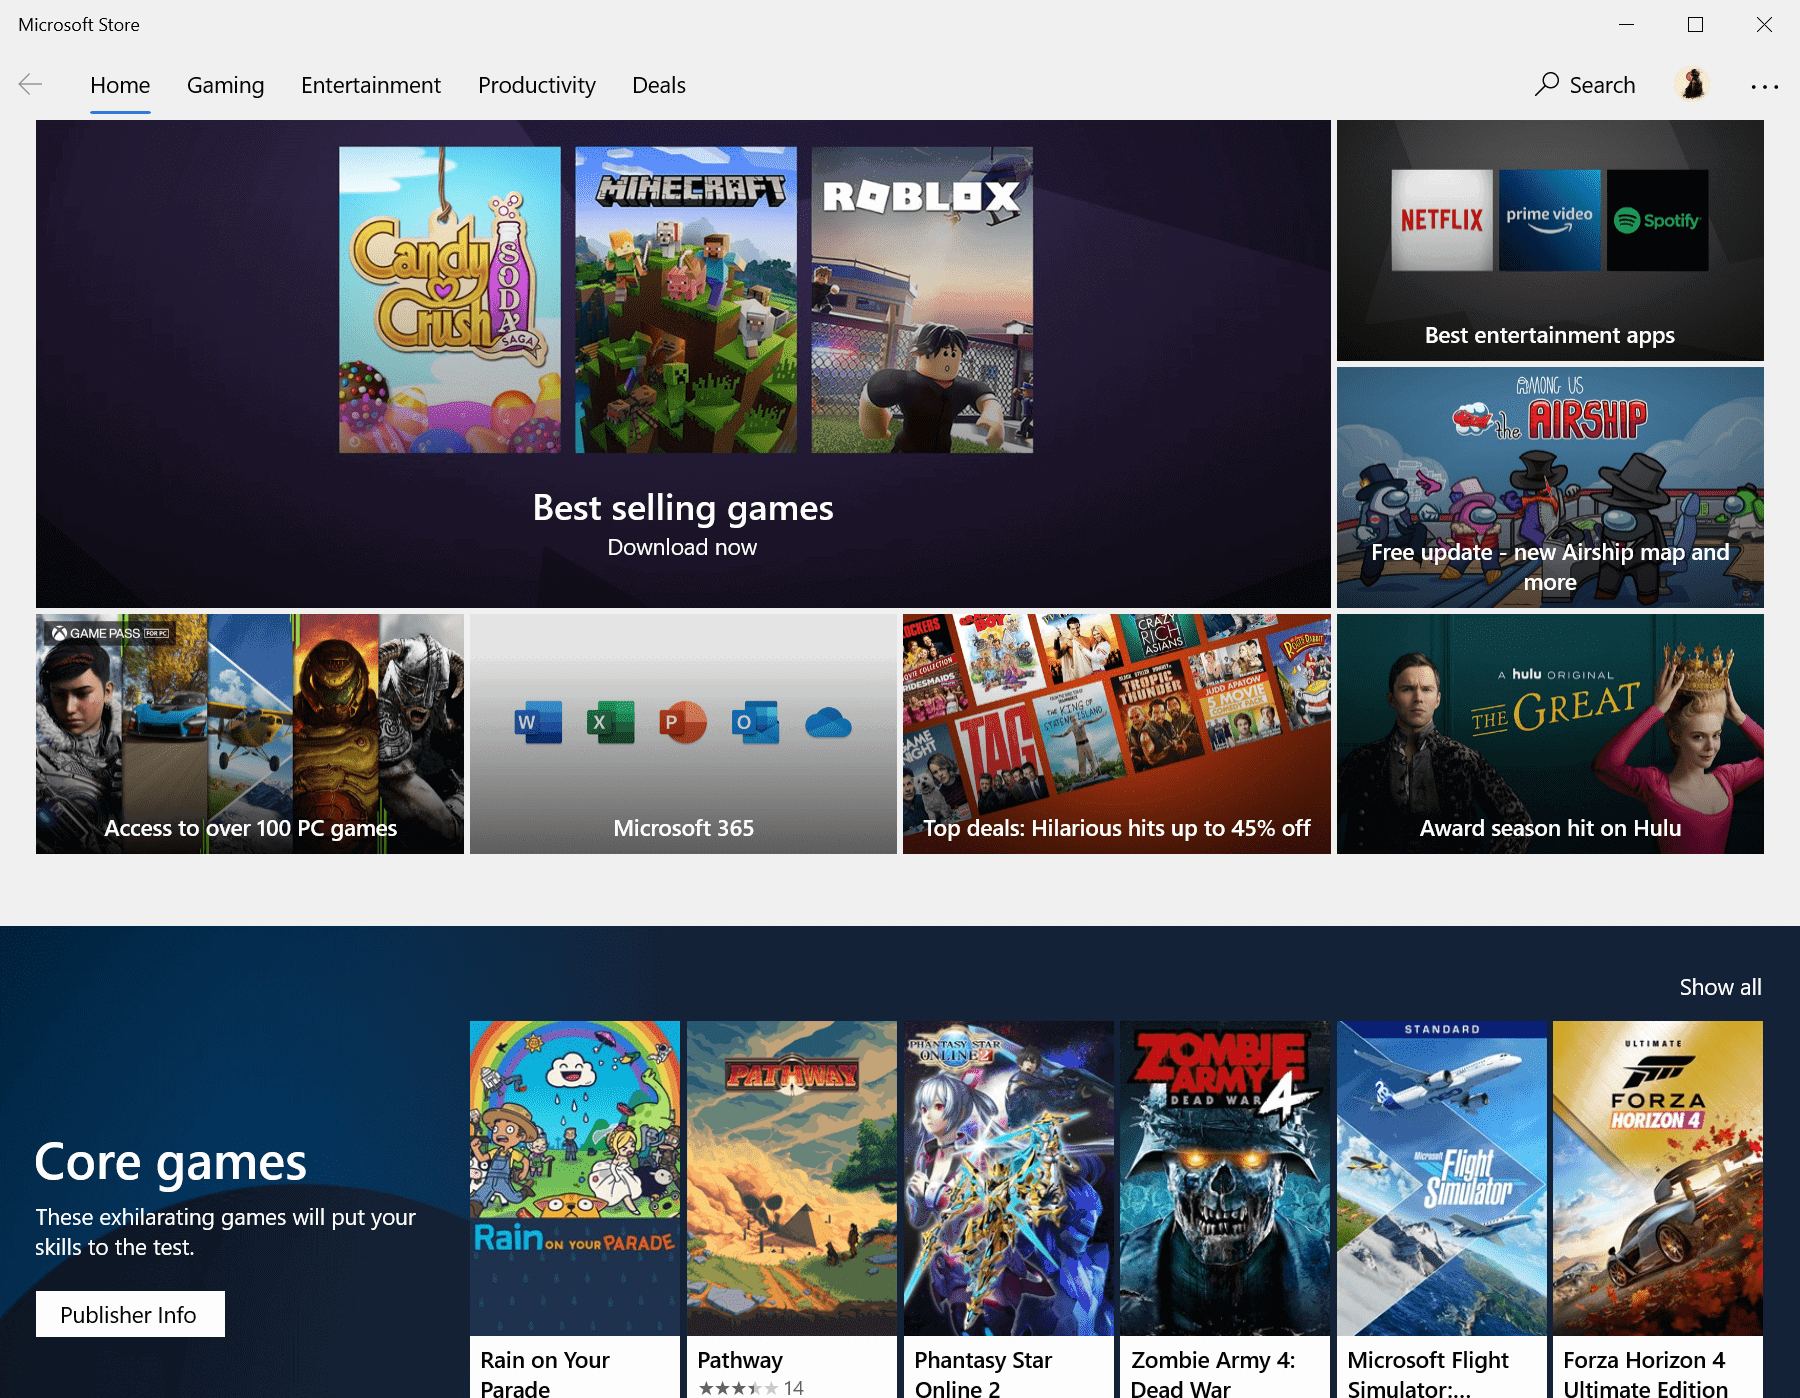 ROBLOX UWP app is now available on Windows Store